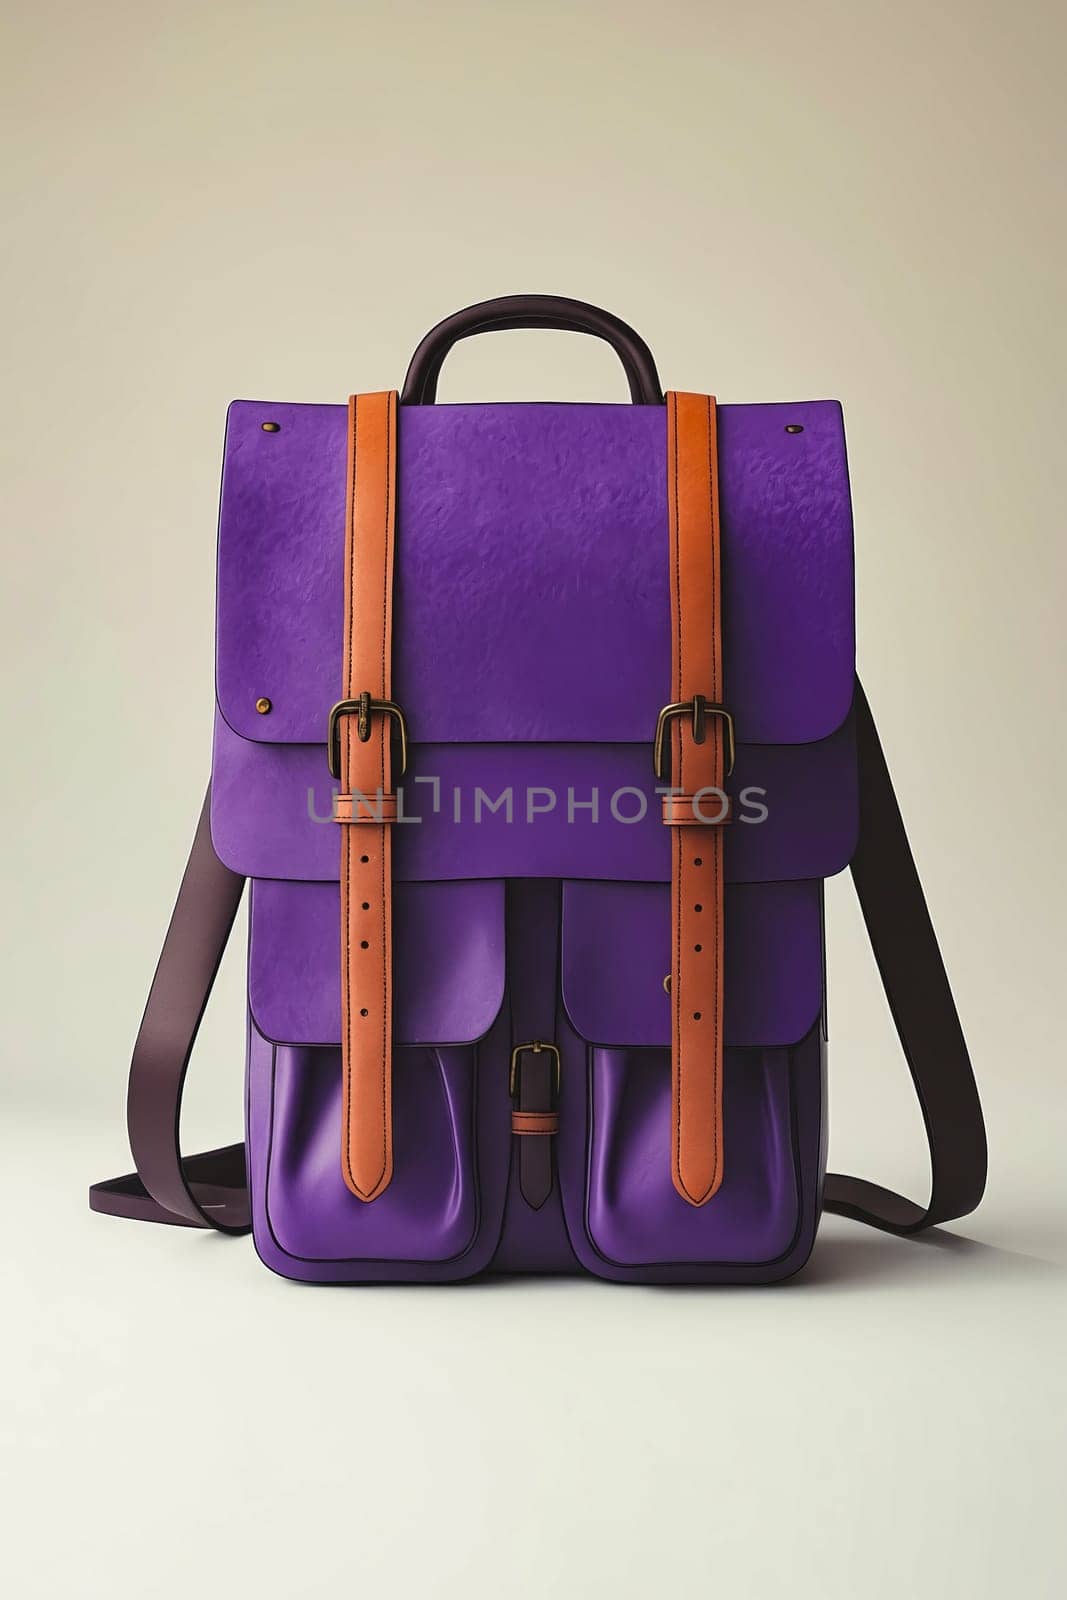 A purple and brown leather backpack with a brown strap. The strap is attached to the backpack and is visible on the right side of the backpack. Generative AI